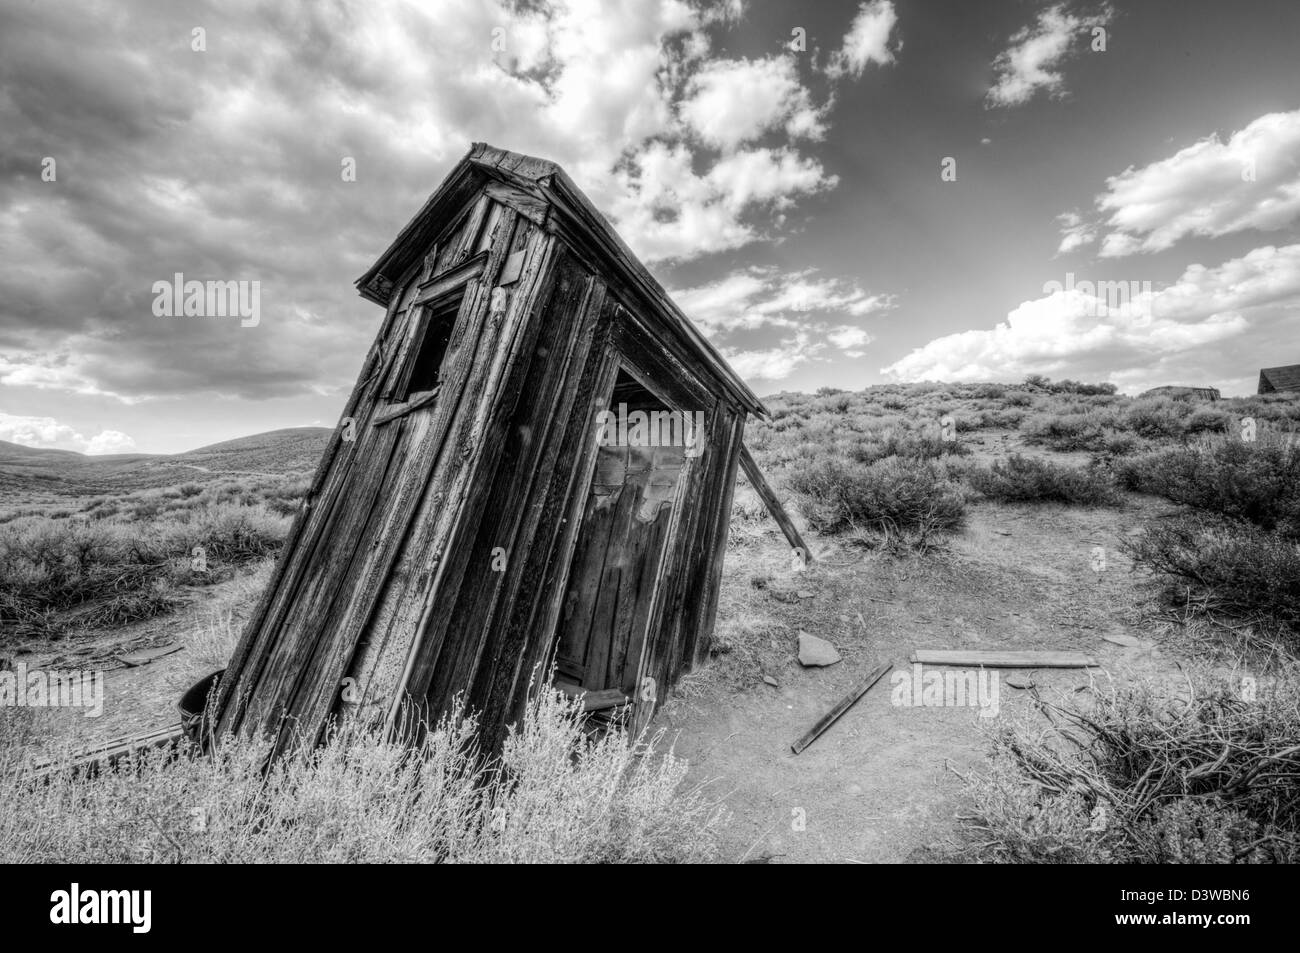 Bodie (California) - Ghost Town in Black and White Stock Photo